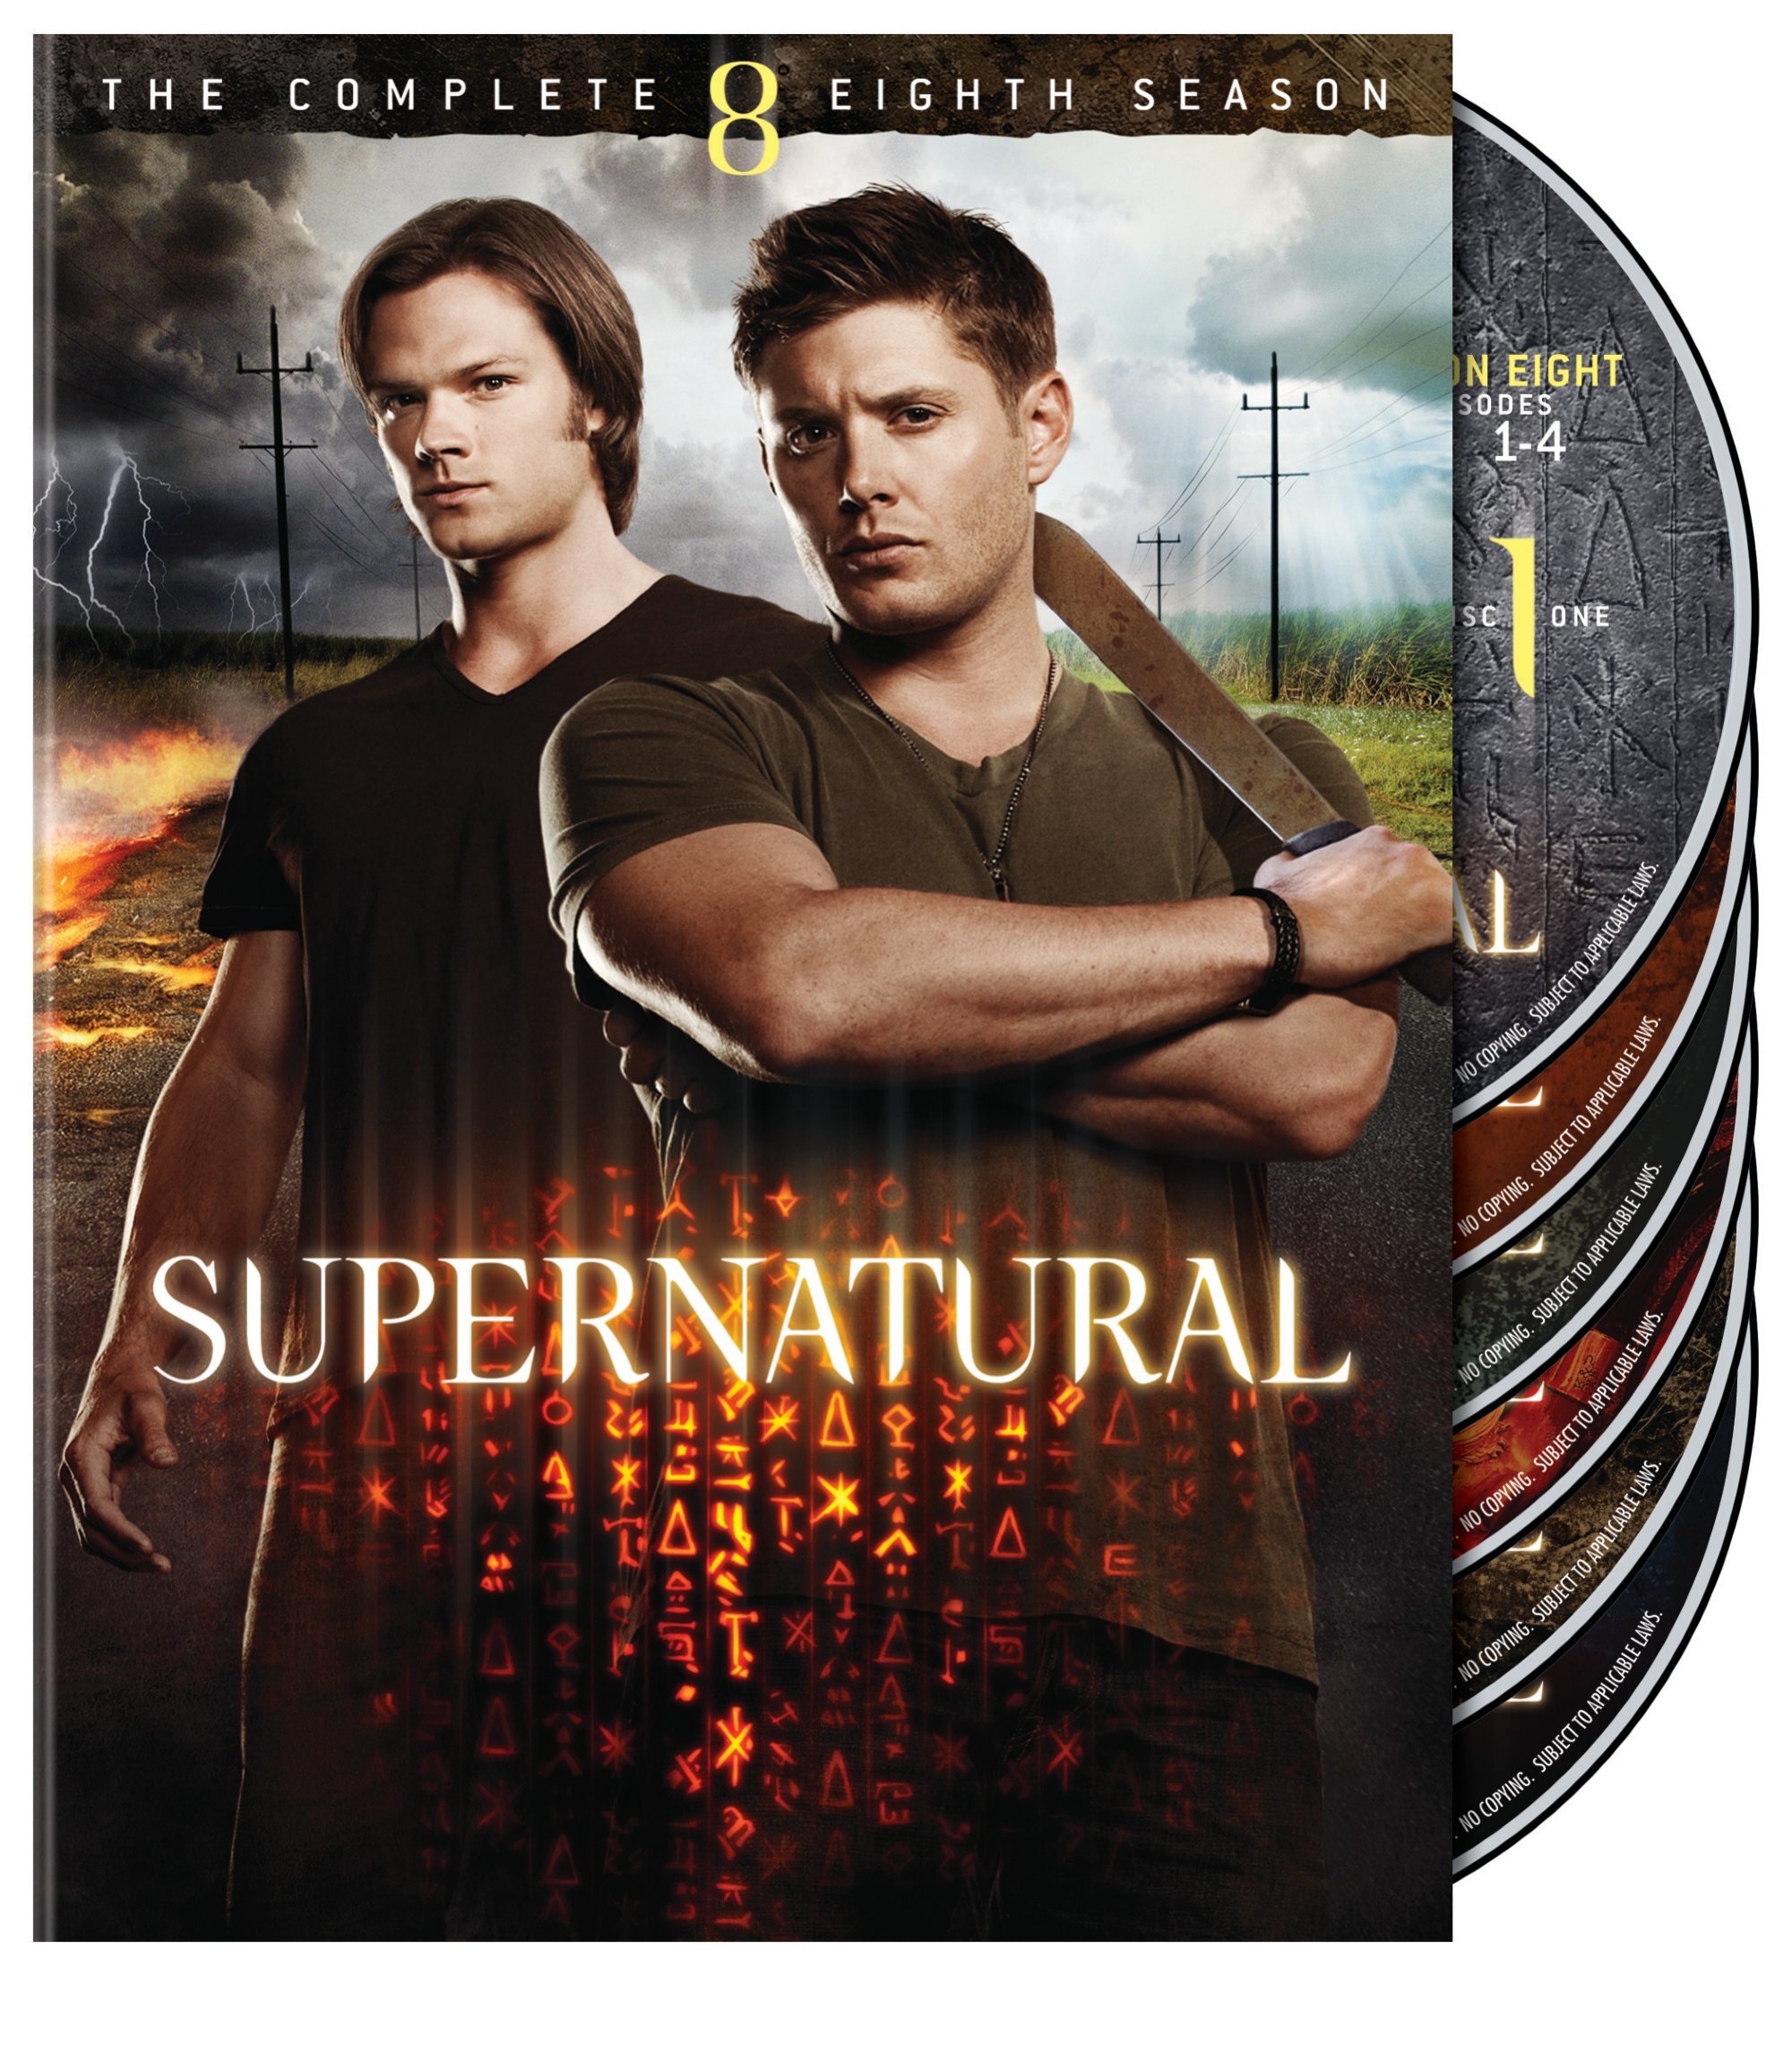 Supernatural: The Complete Eighth Season (Box Set) - DVD [ 2013 ]  - Sci Fi Television On DVD - TV Shows On GRUV